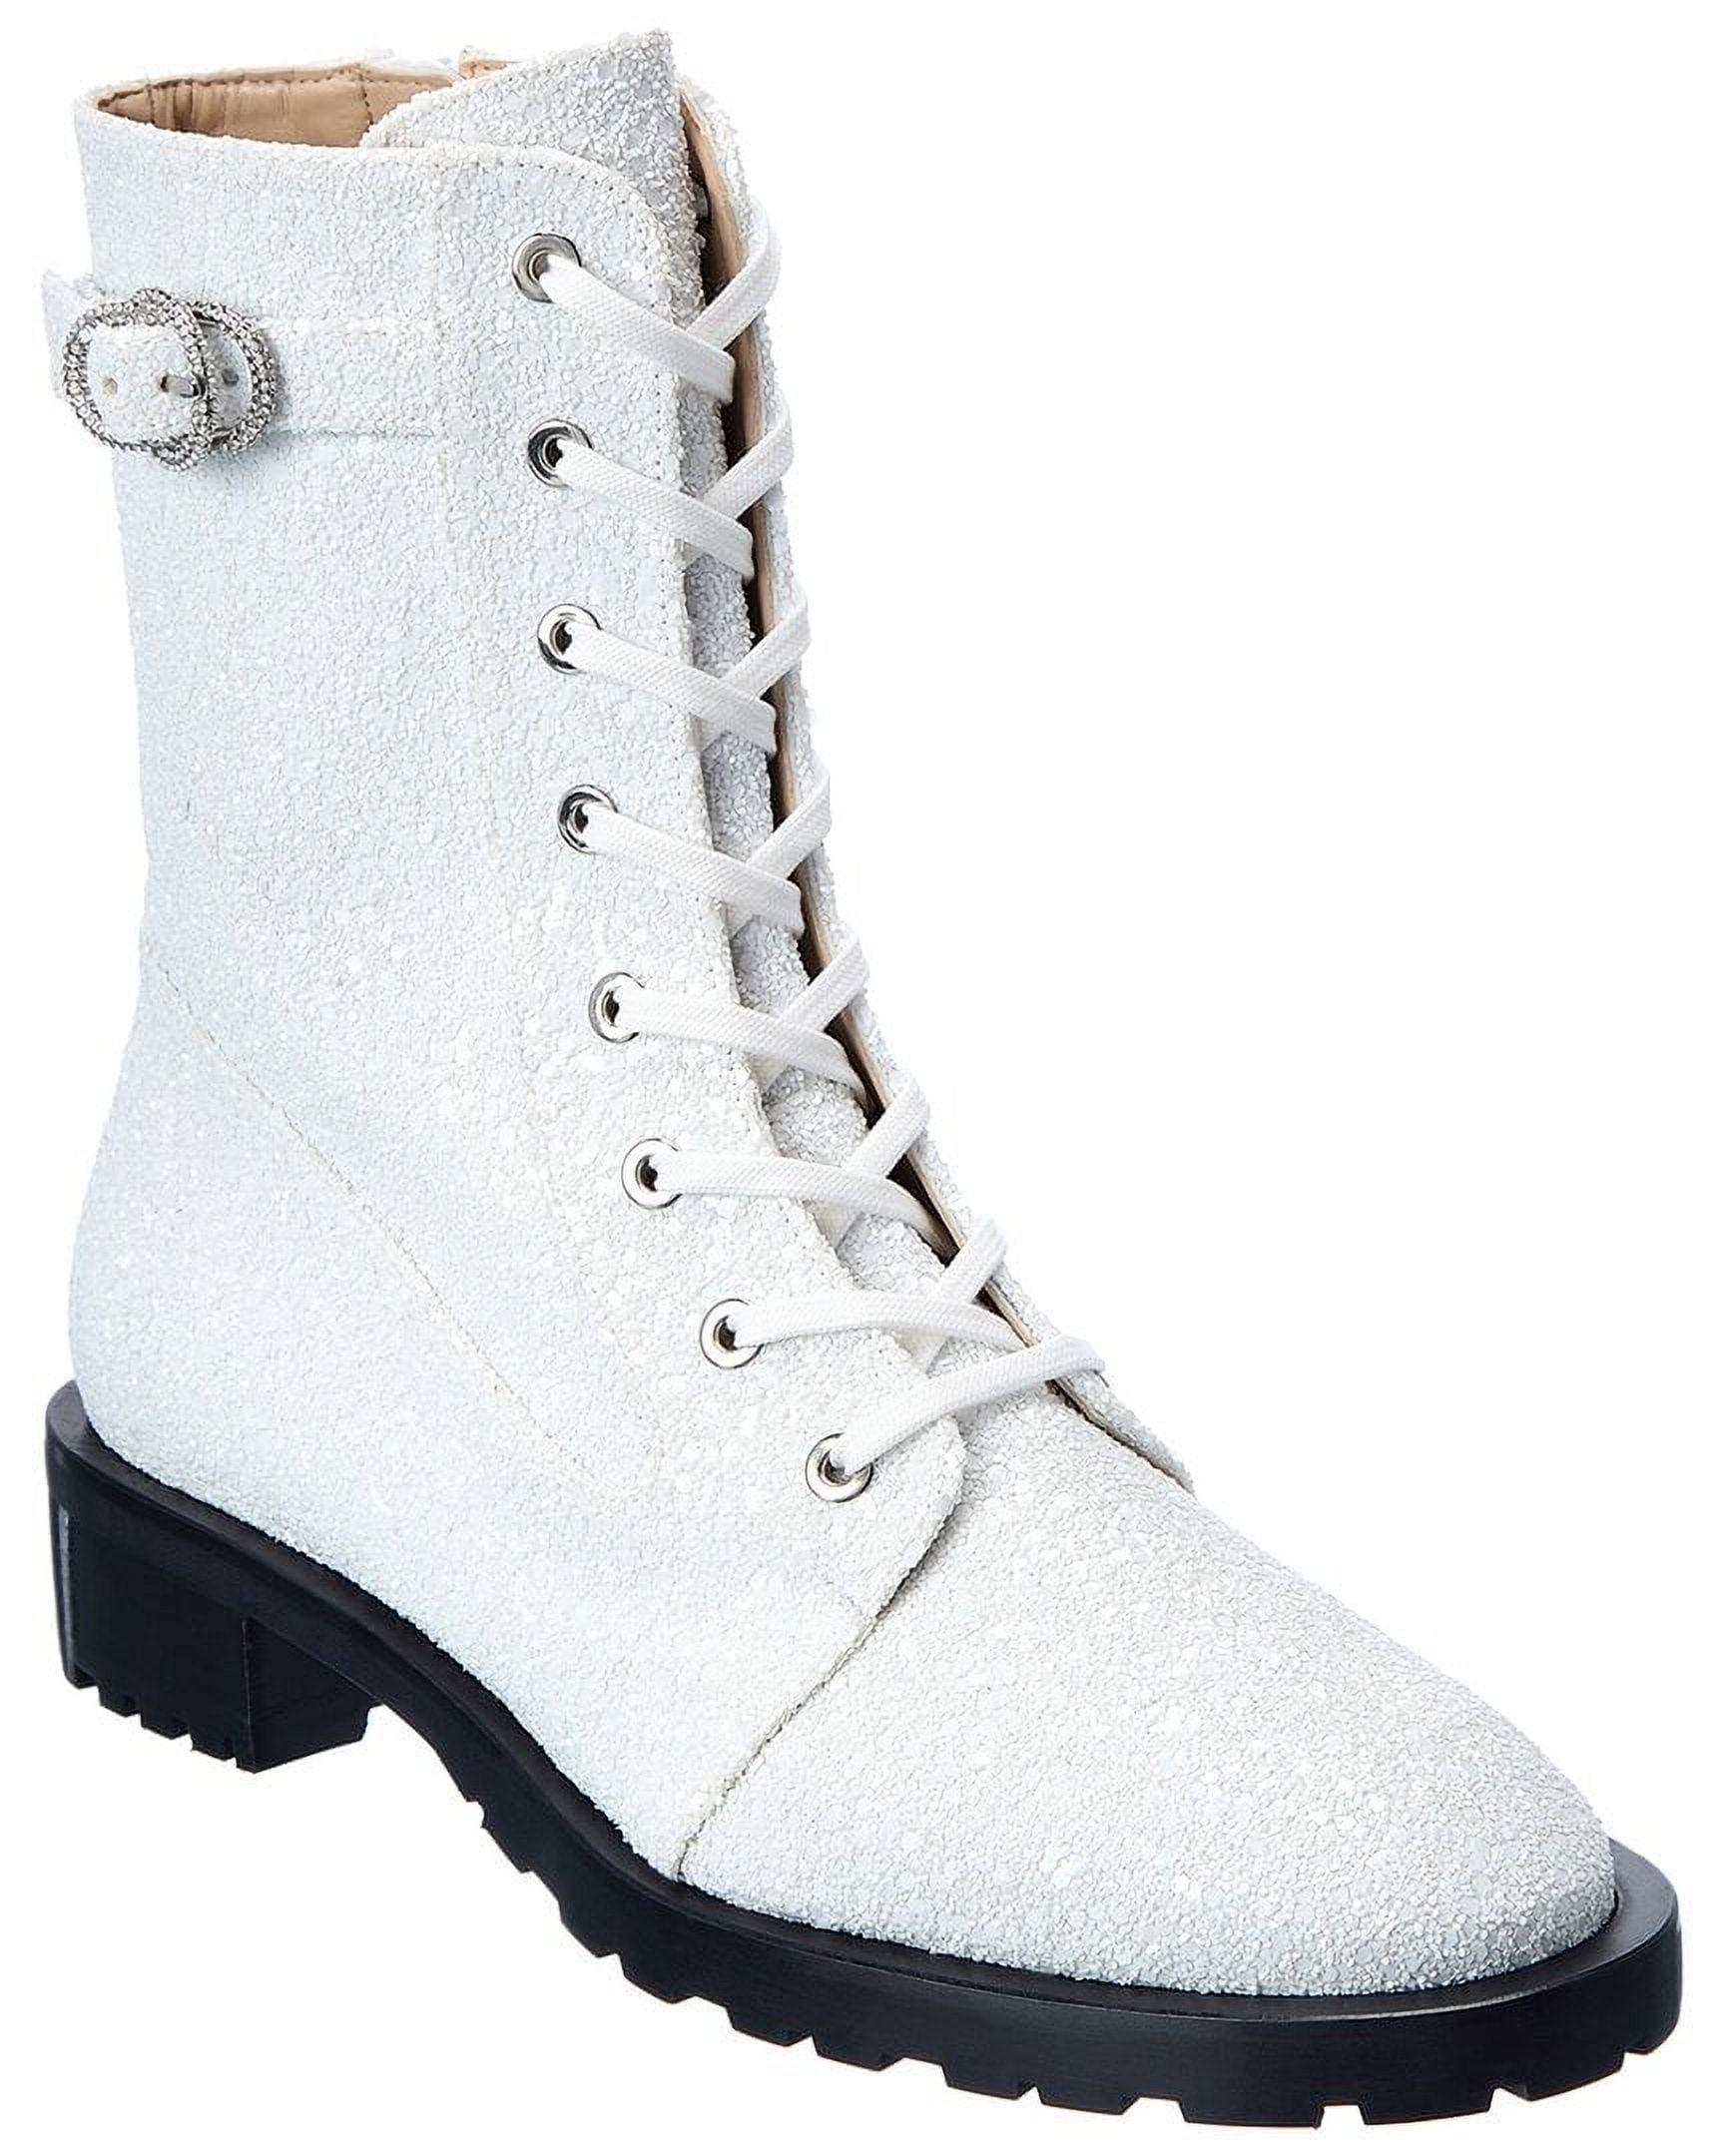 Stuart Weitzman Crystal Buckle Lace-Up Bootie, 6, White 